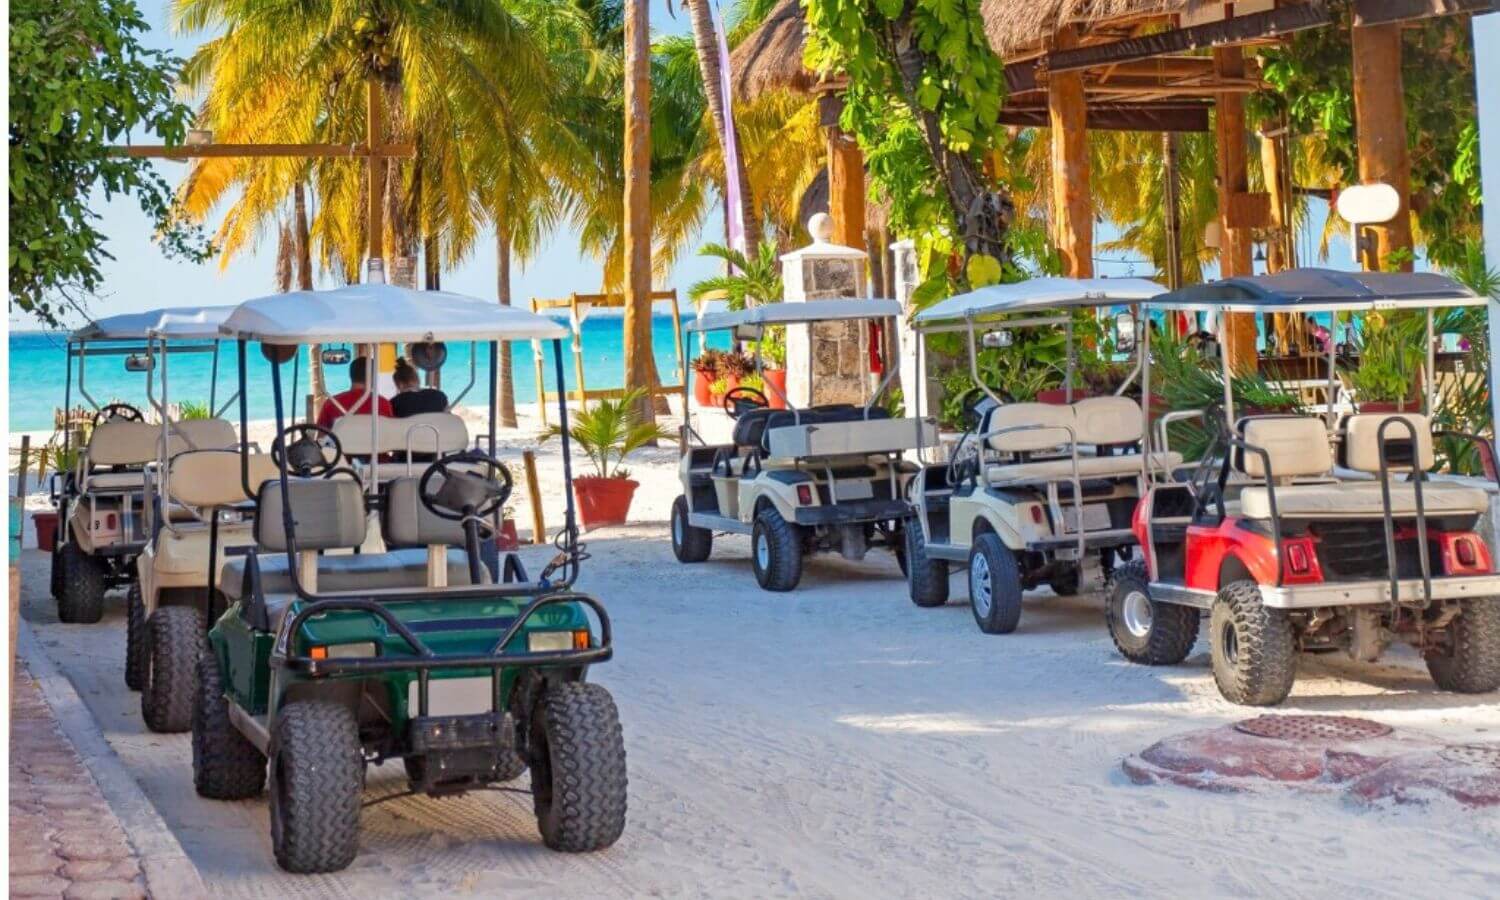 Golf carts parked on a sandy street by a beach club on Isla Mujeres.